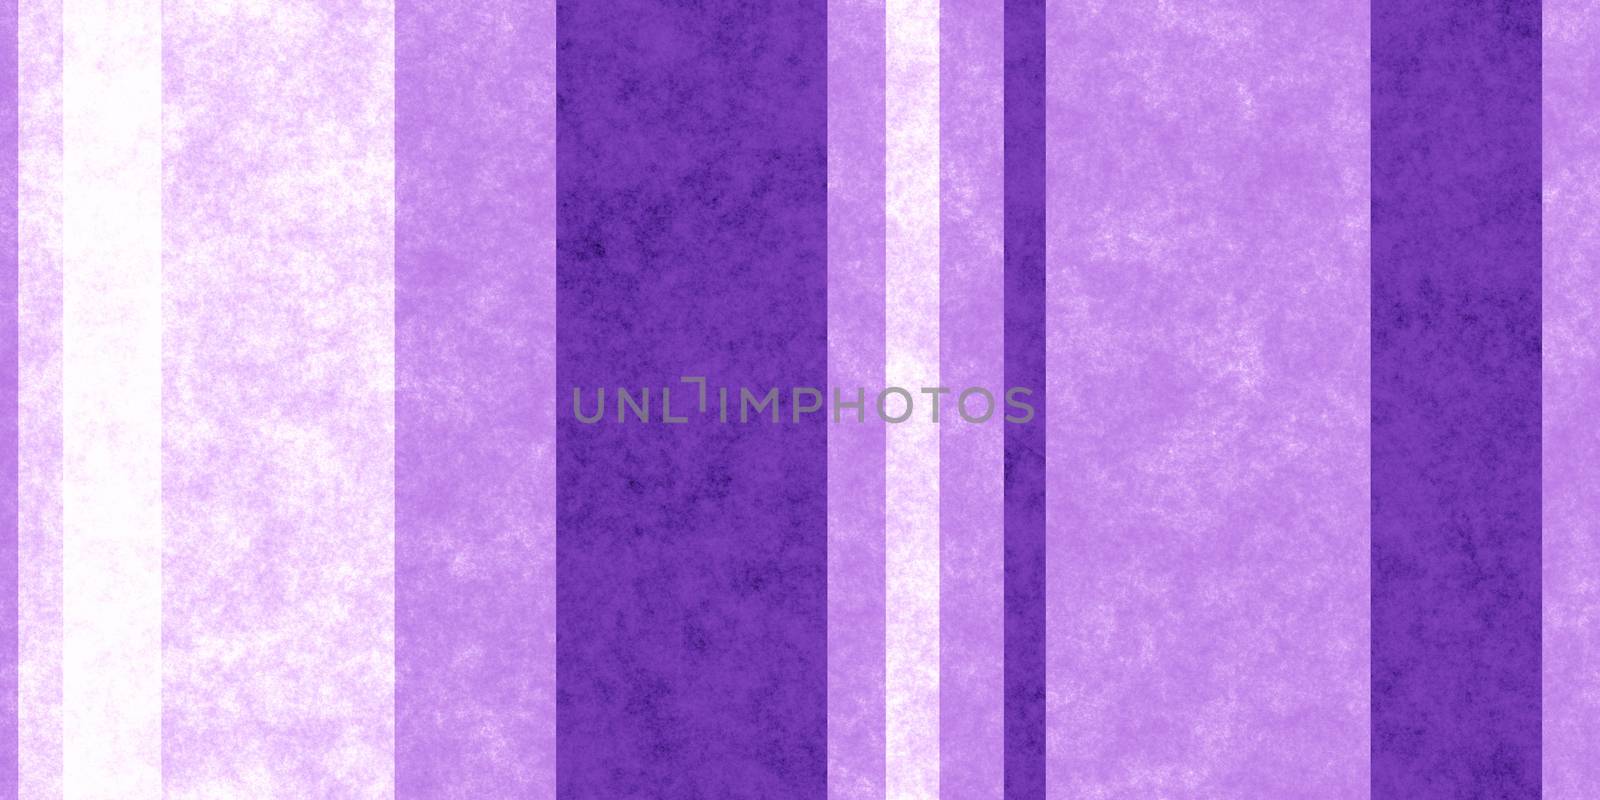 Lilac Seamless Grunge Stripe Paper Texture. Retro Vintage Scrapbook Lines Background. Vertical Across Direction.